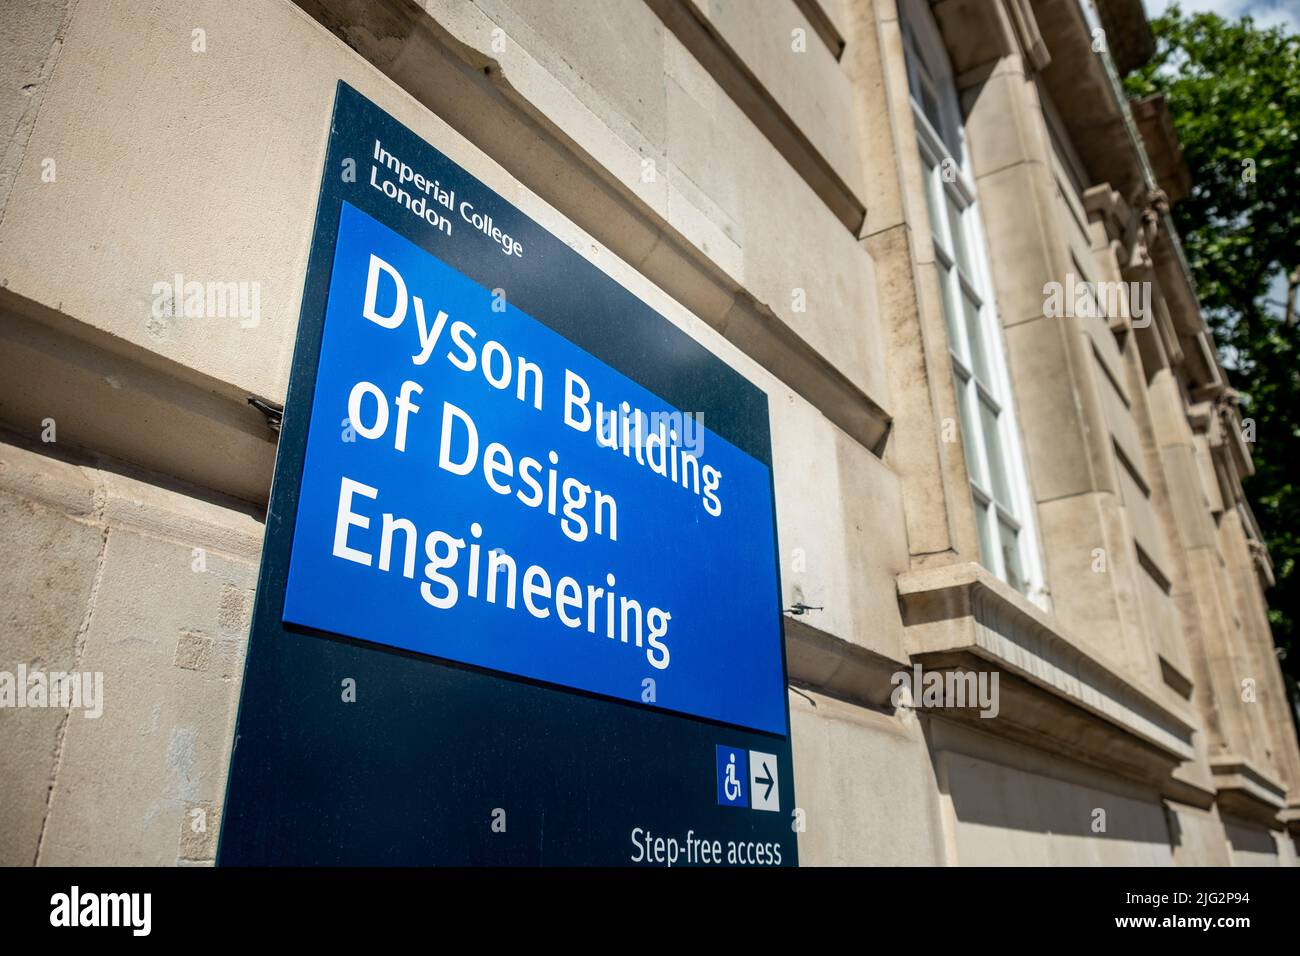 London- June 2022: Dyson Building of Design Engineering, Imperial College London Stock Photo